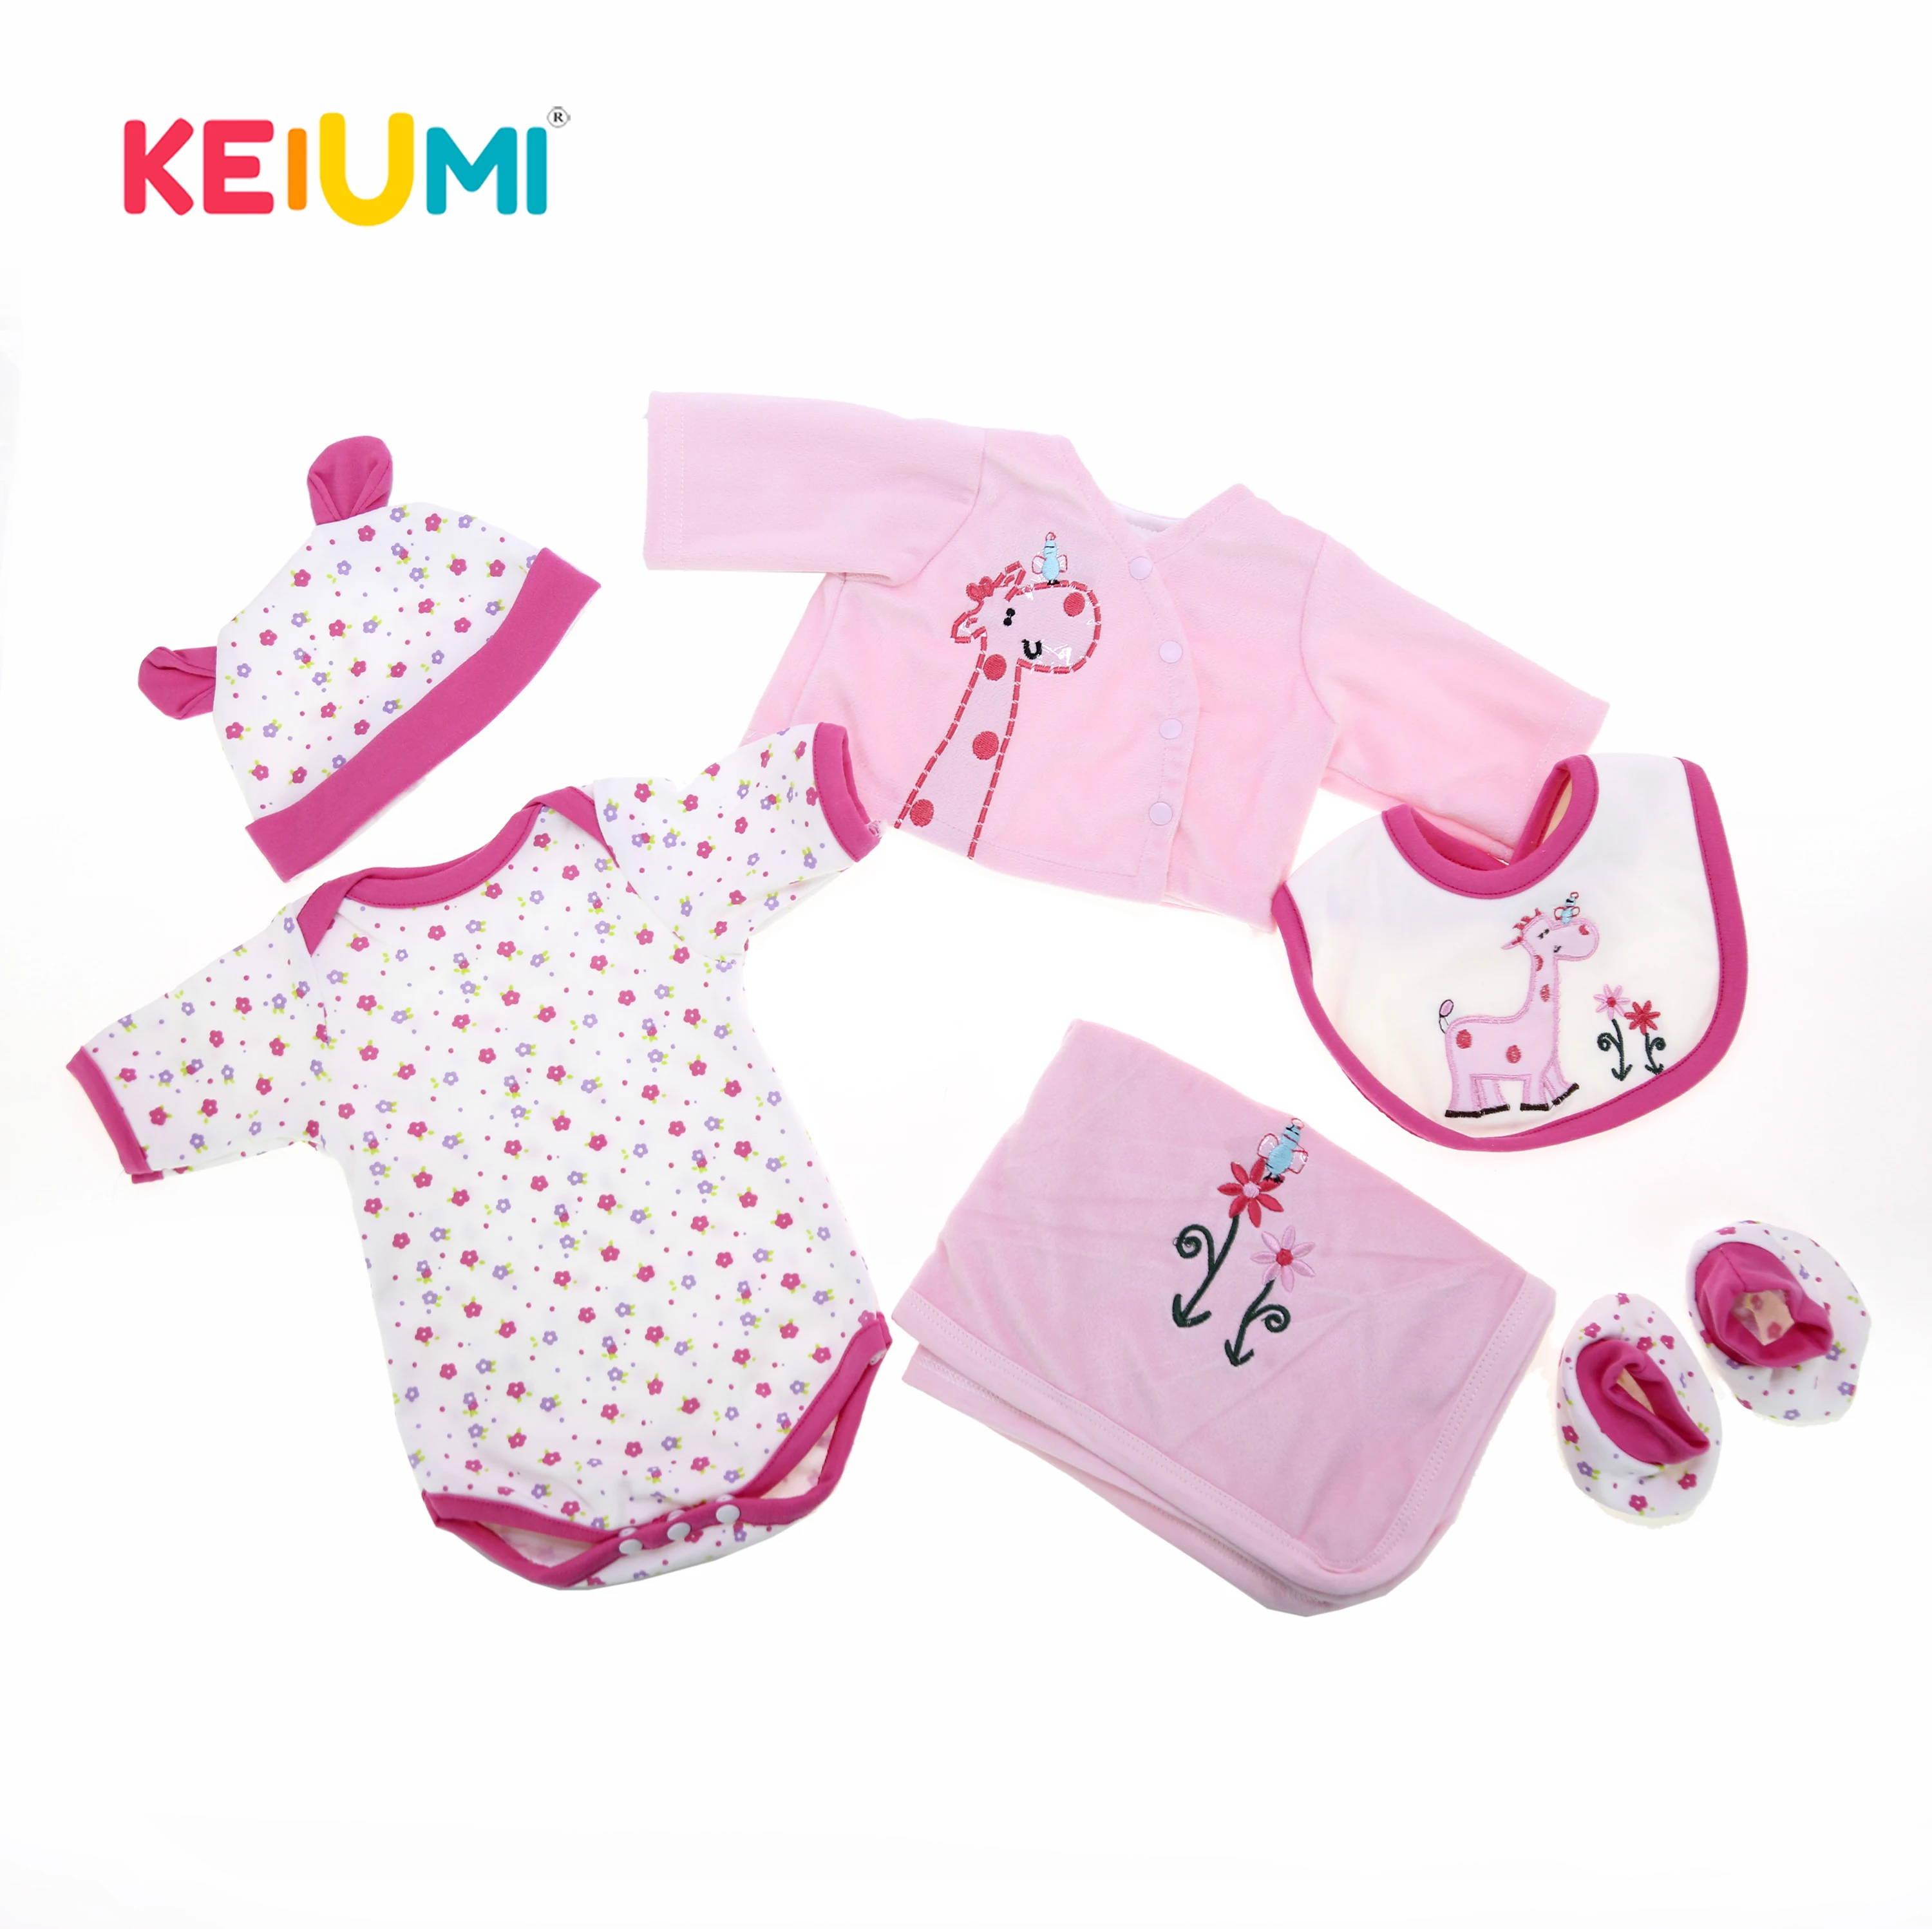 

Powder Deer Set Baby Girl Clothes Set Suit For 22-23 Inch Reborn Dolls Baby Clothes Pink Six-piece Set Babies Clothes